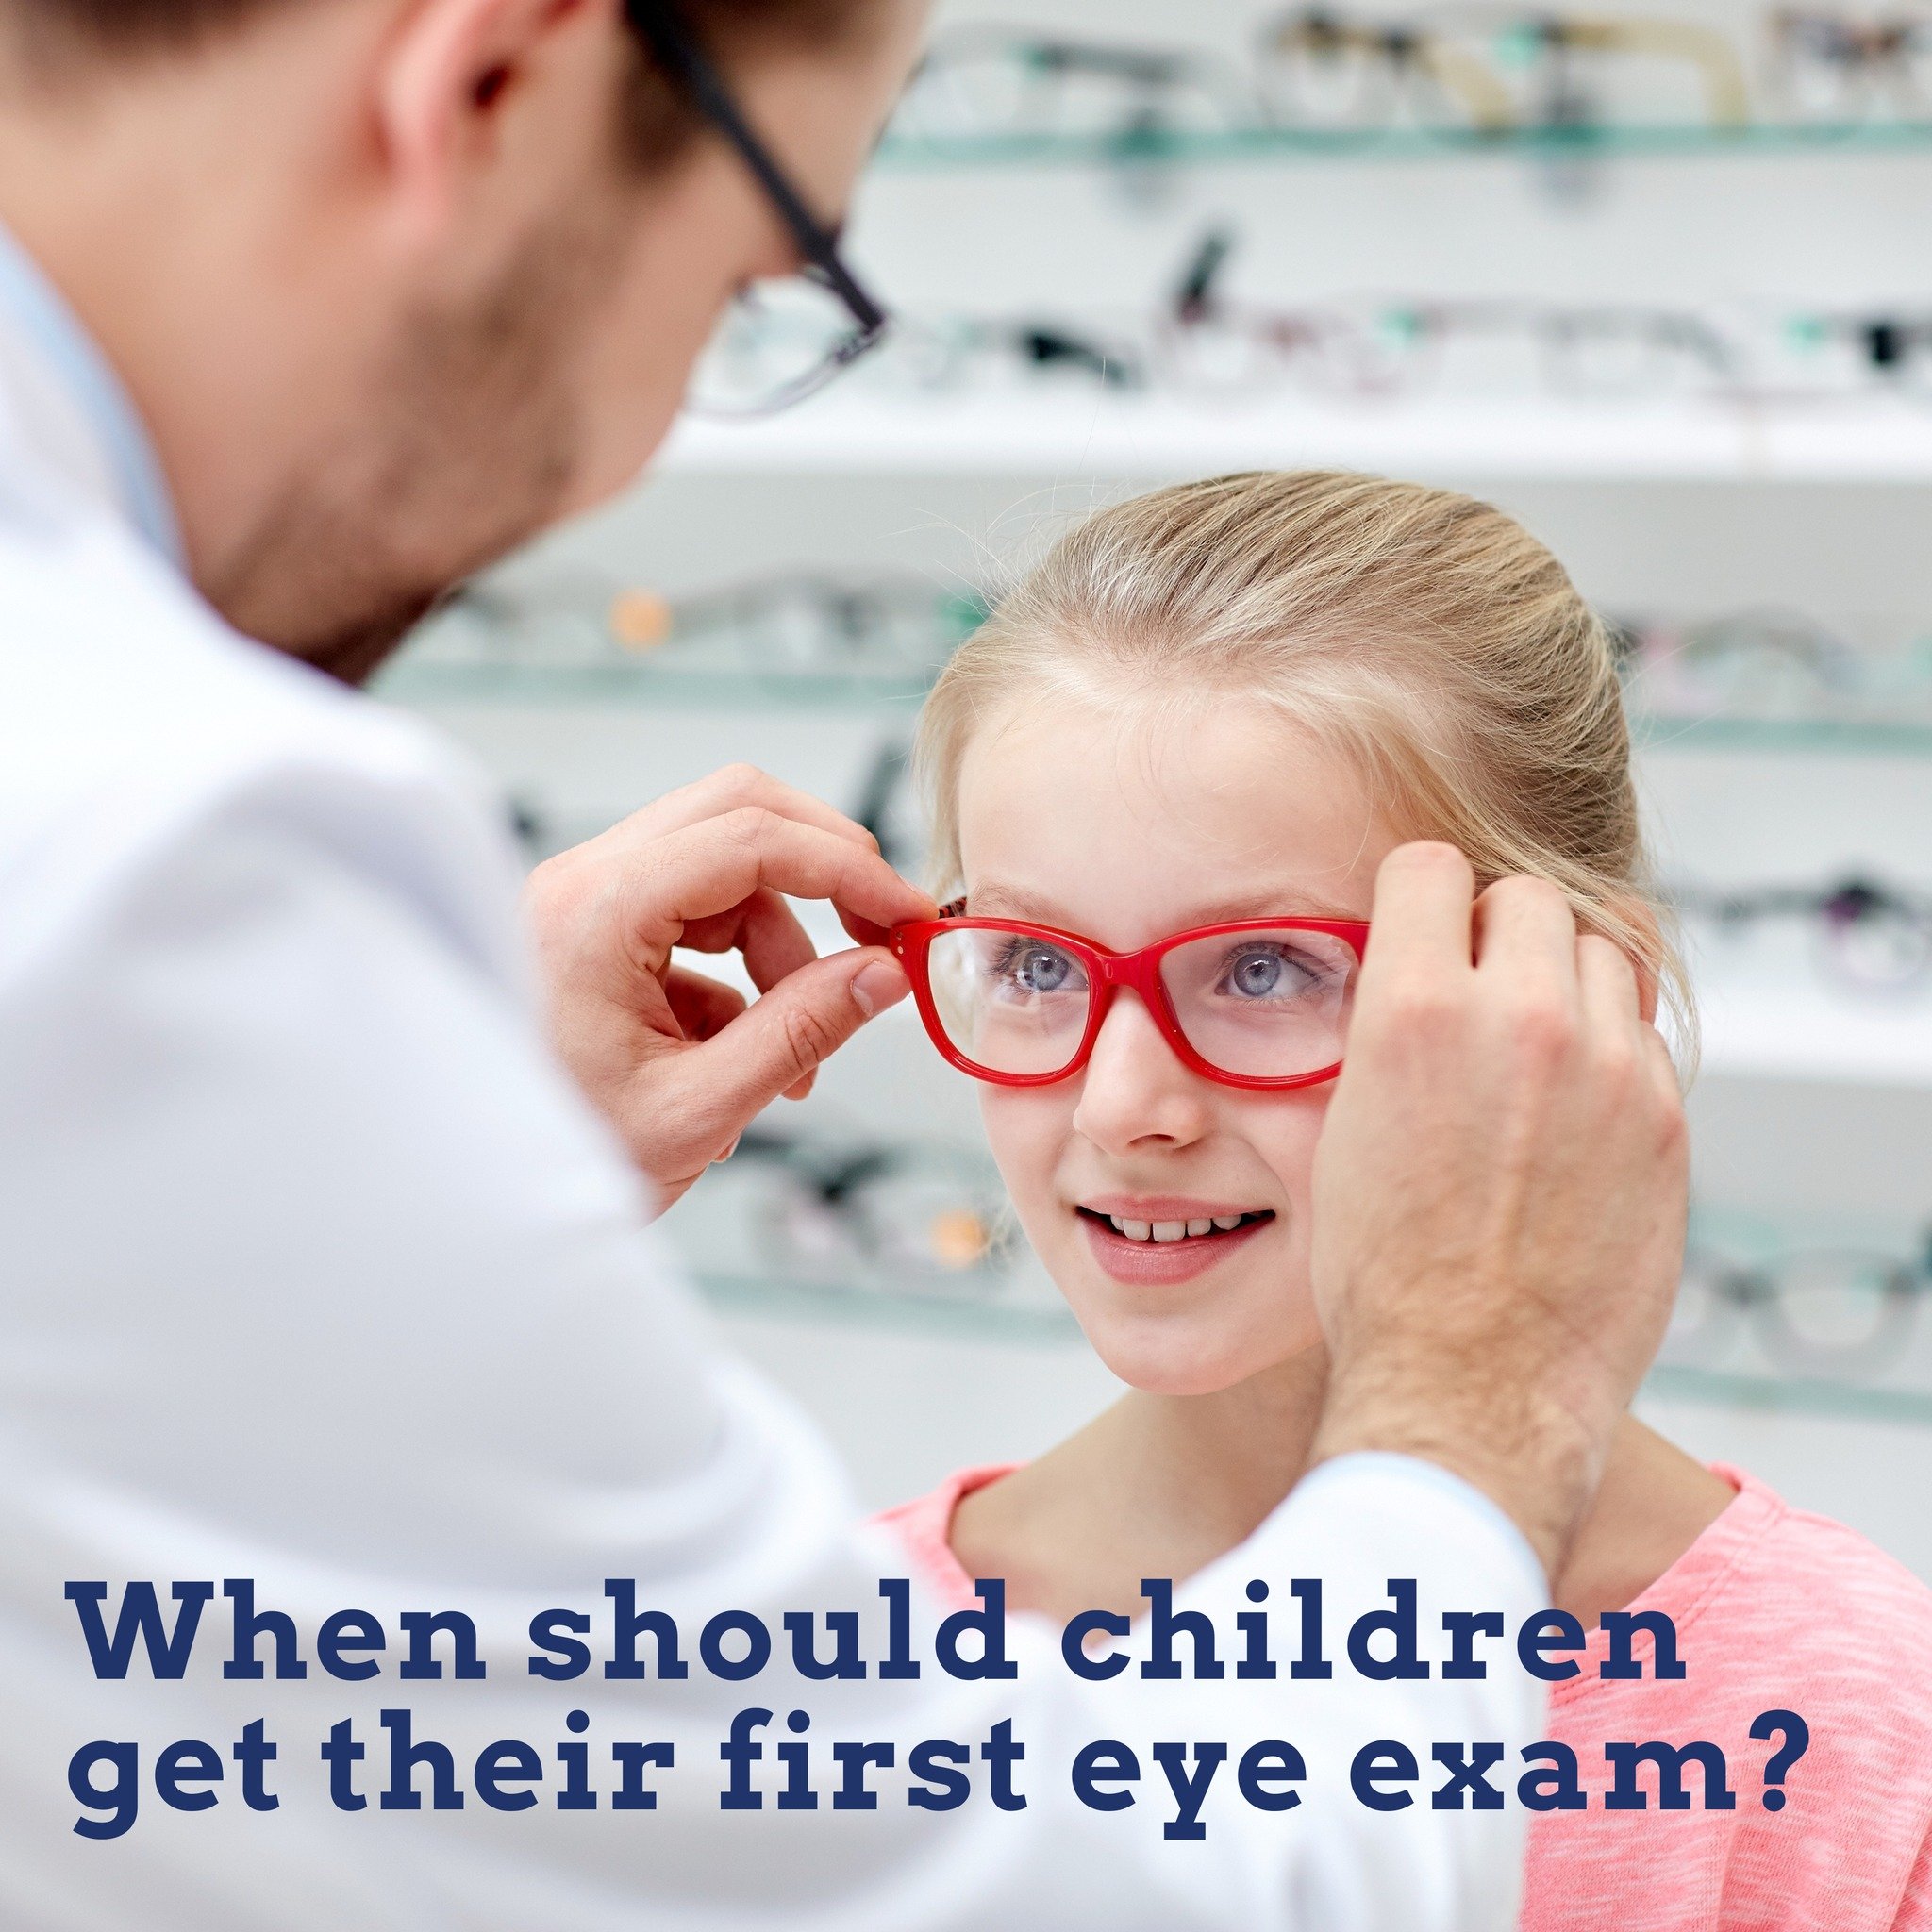 Children should have their first comprehensive eye exam at around 6 months of age. This early examination is important to detect any eye problems or conditions that may be present from birth or develop shortly thereafter.

If a child is at higher ris